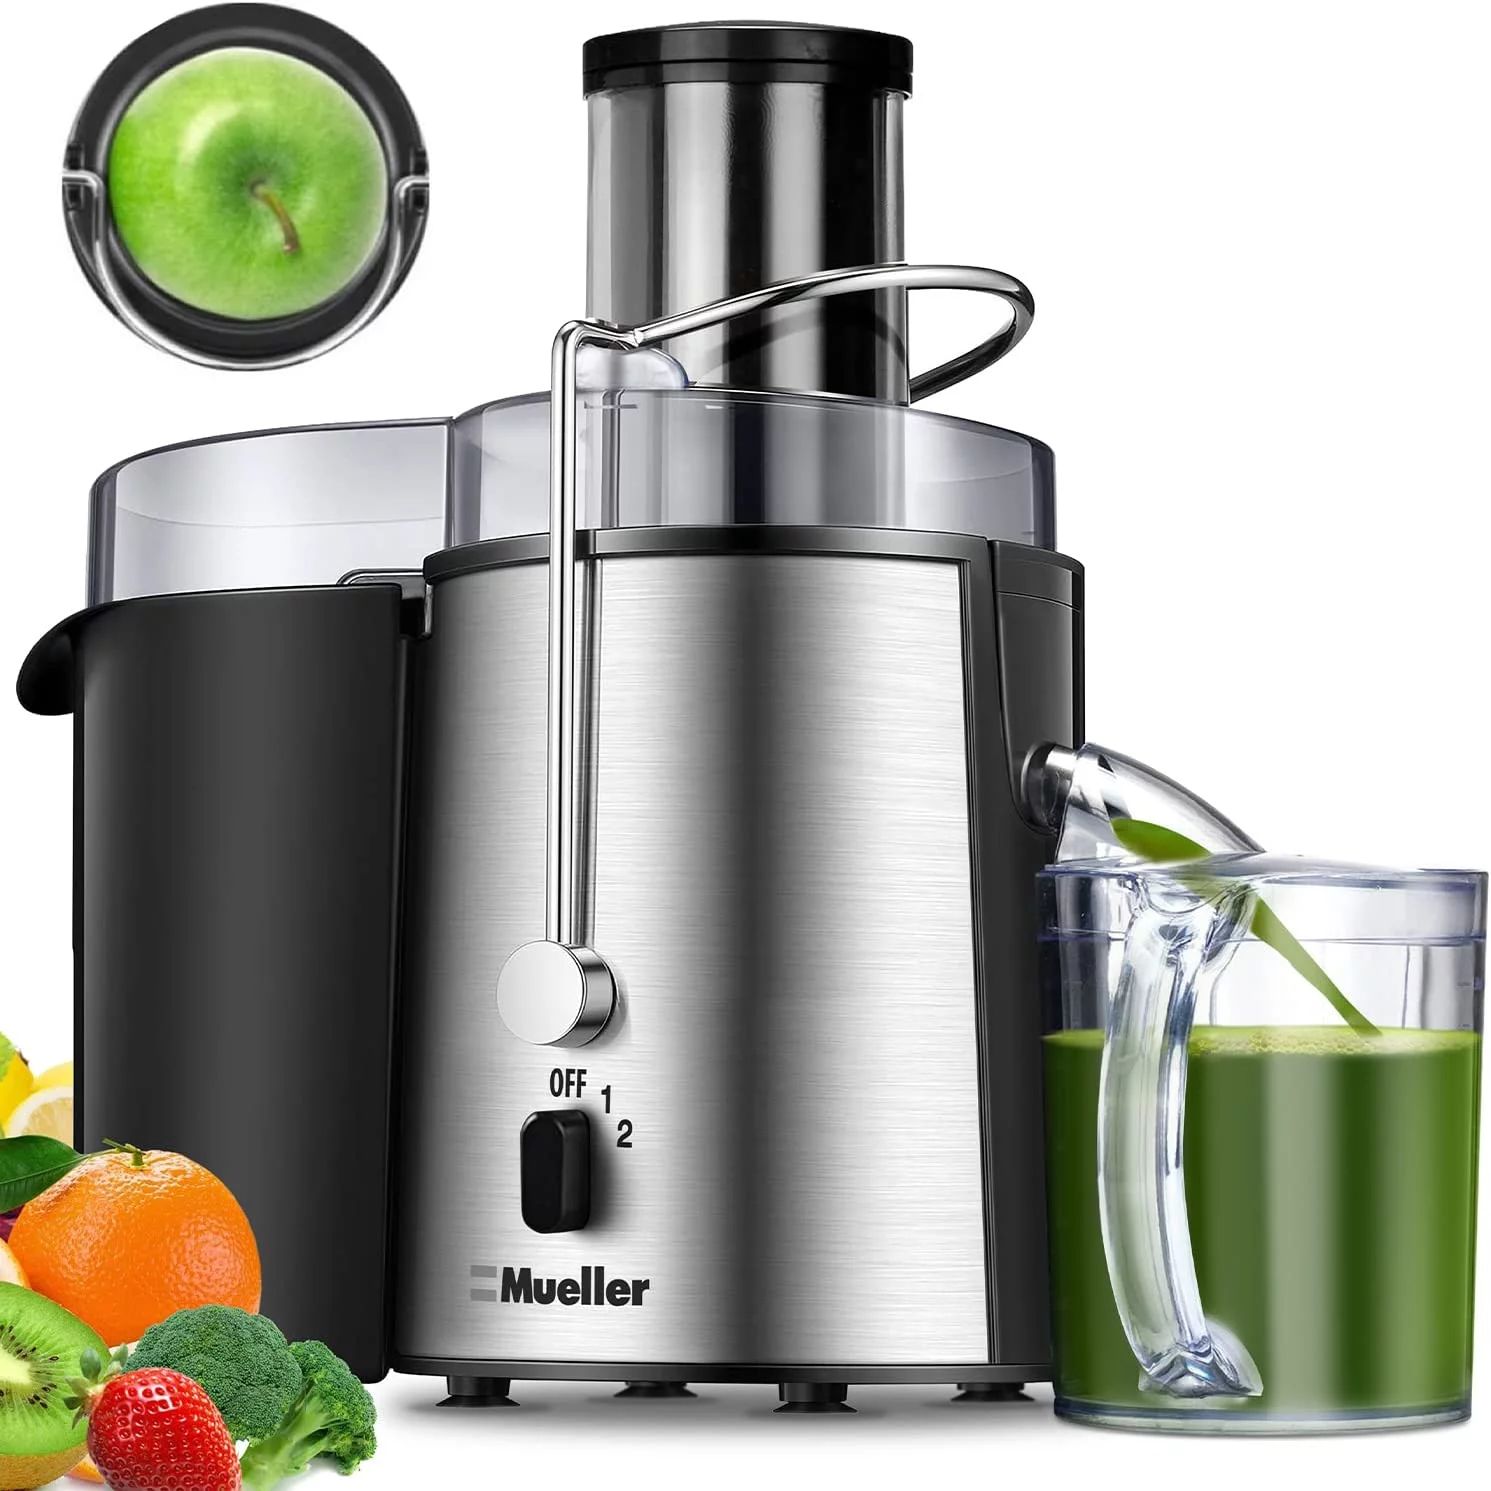 Mueller Juicer Ultra Power, Easy Clean Extractor Press Centrifugal Juicing Machine, Wide 3" Feed ... | Walmart (US)